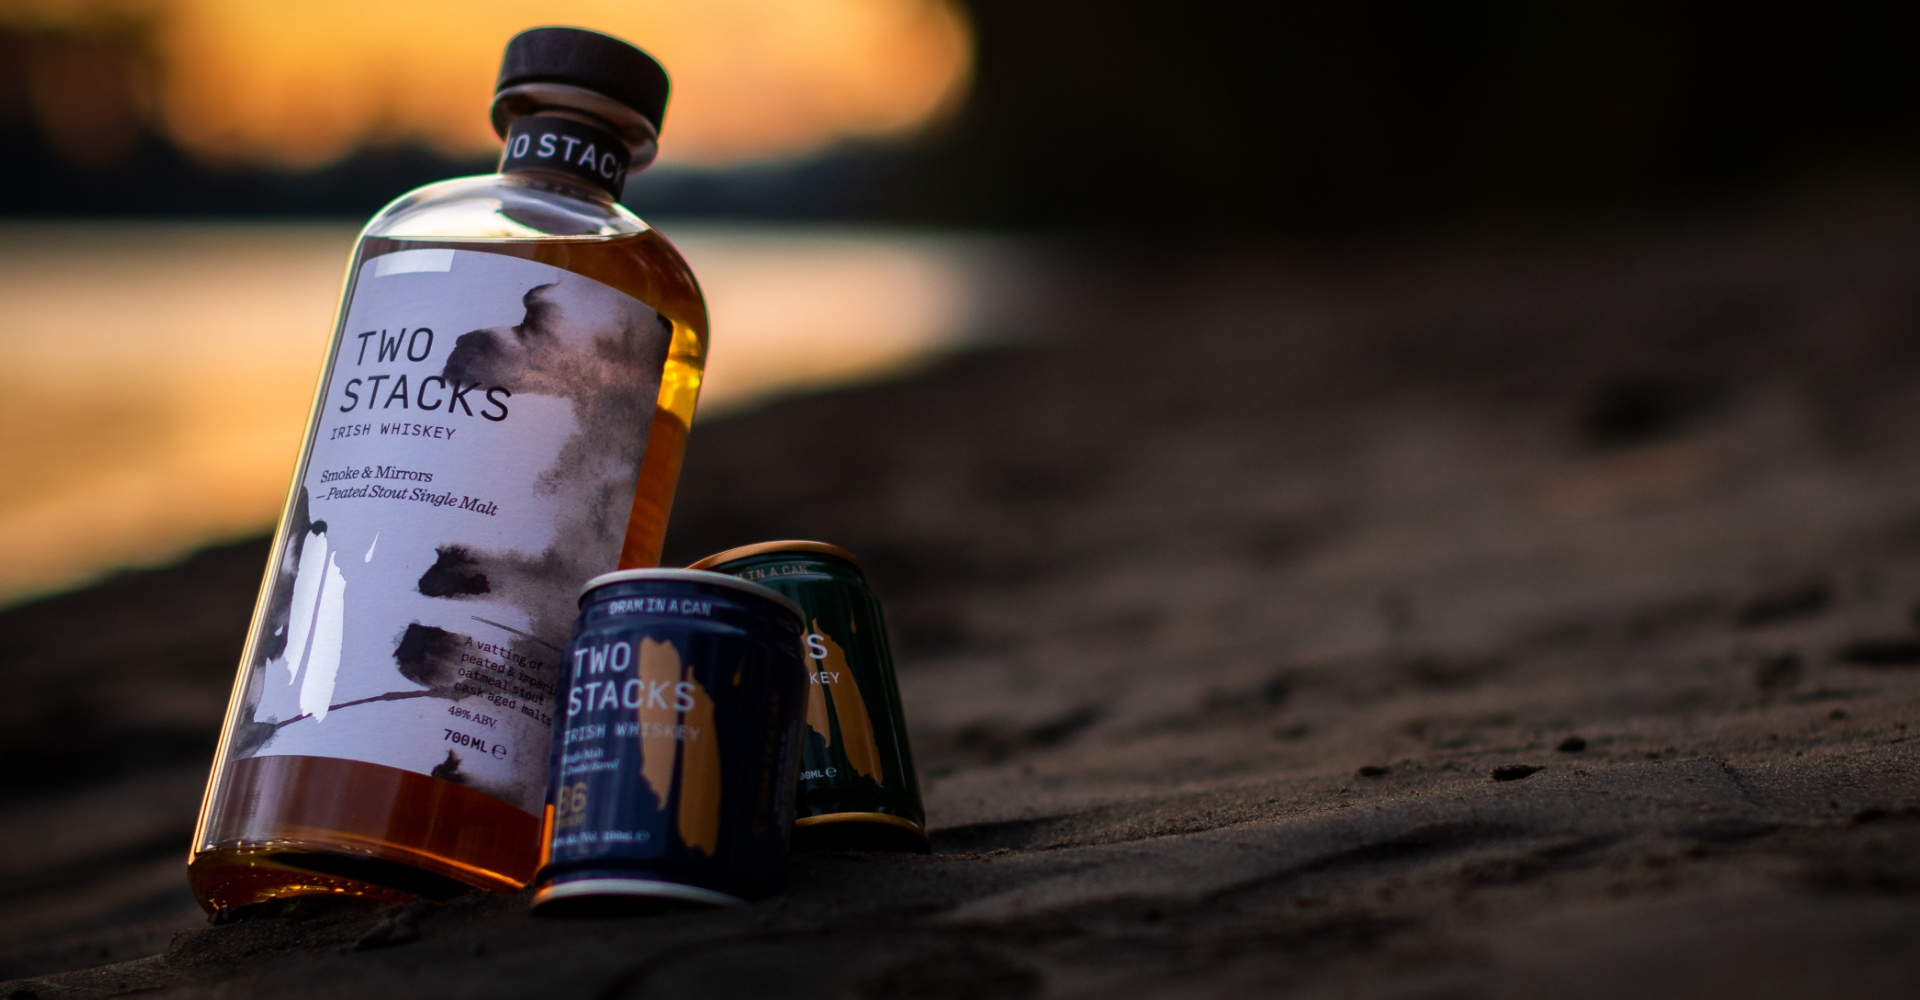 Two Stacks Irish Whiskey bottle and blue cans sitting on sand with an orange sunset and water in the background.